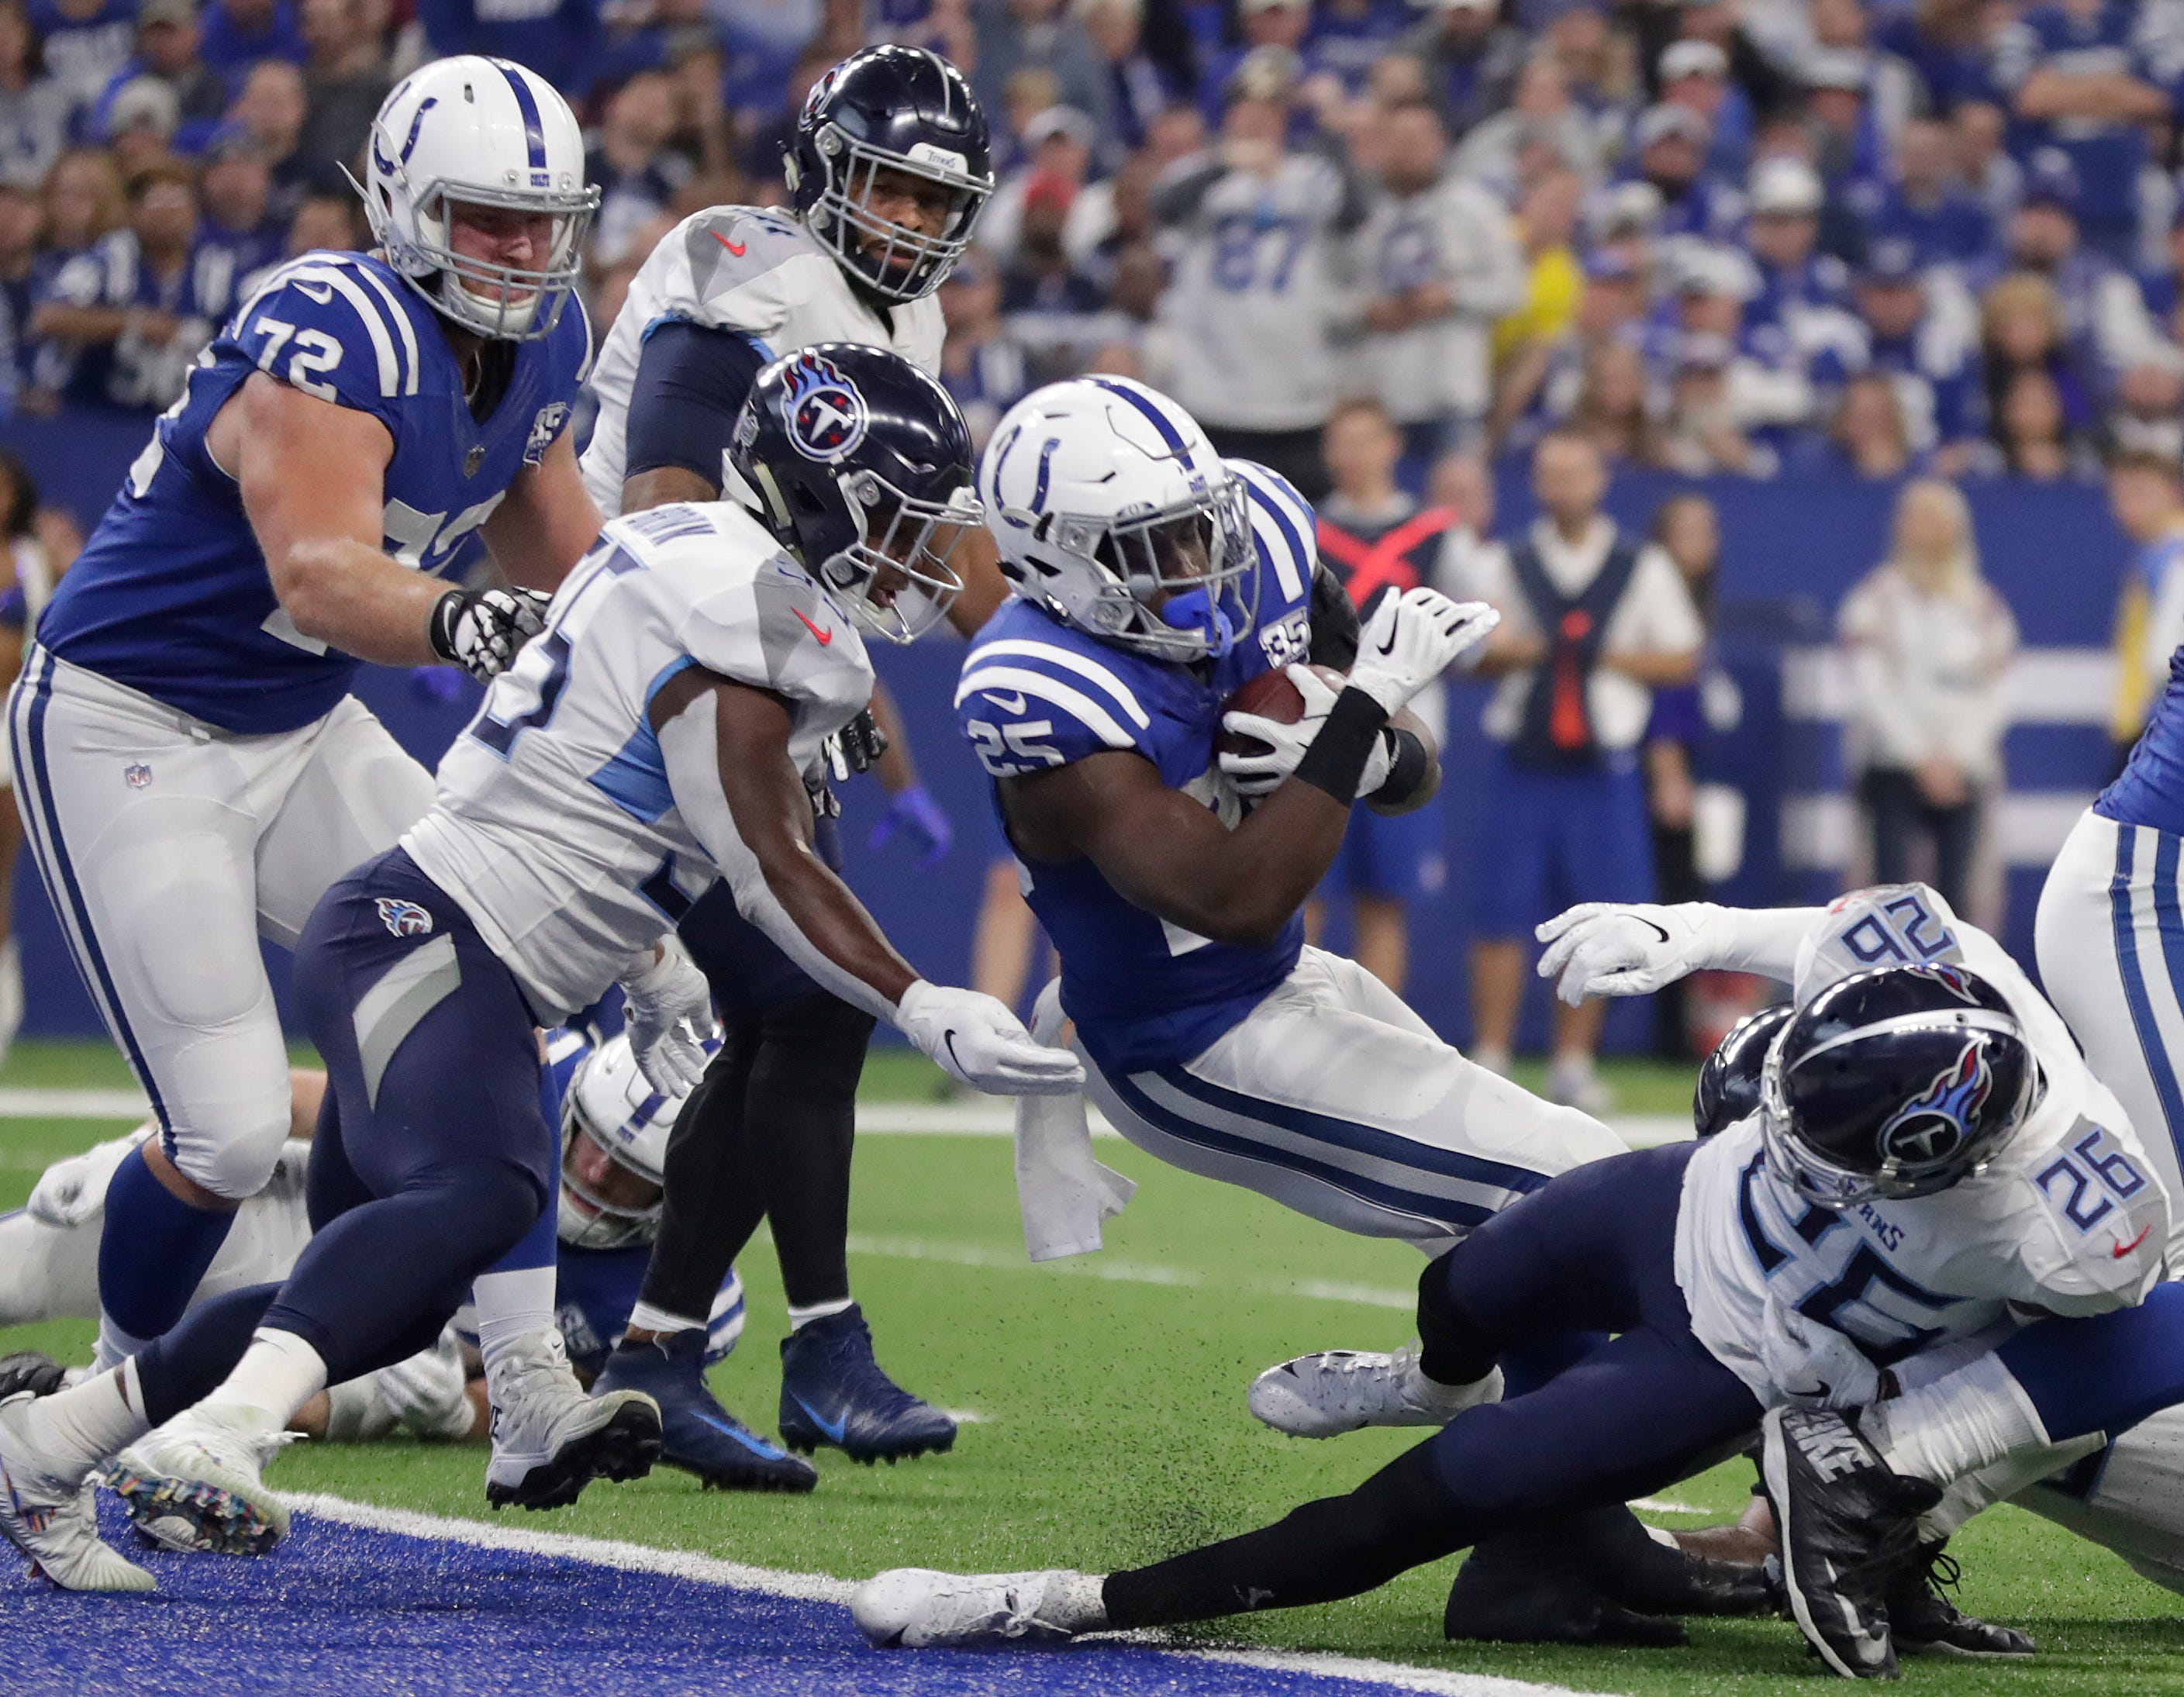 Luck keeps record perfect against Titans with 38-10 victory